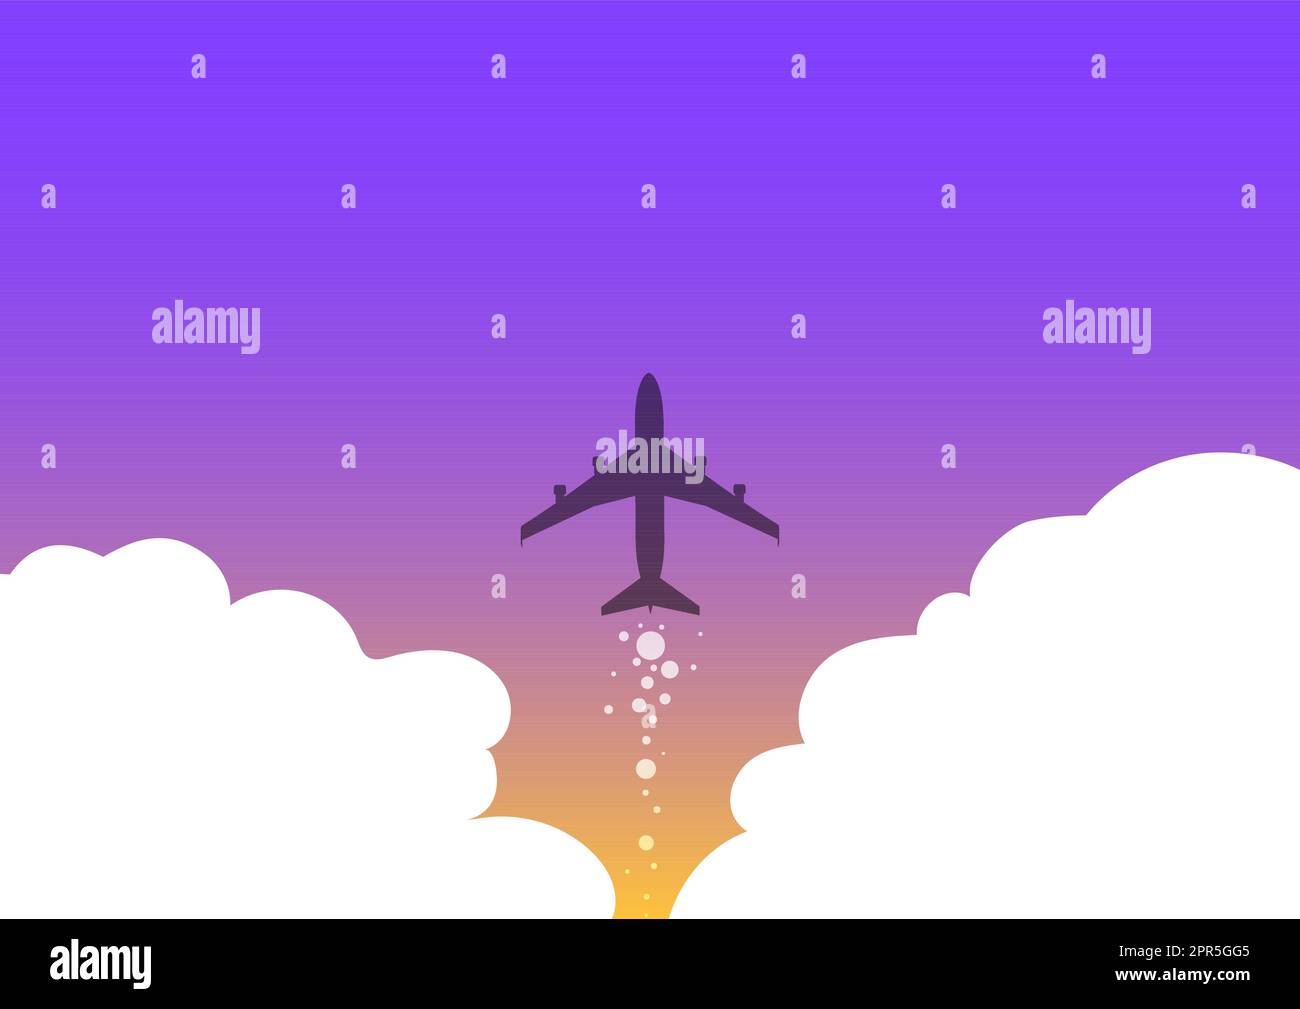 Illustration Of Airplane Launching Fast Straight Up To The Skies. Aircraft Drawing Flying High At Sky. Jet Design Floating At The Air With Clouds. Stock Vector